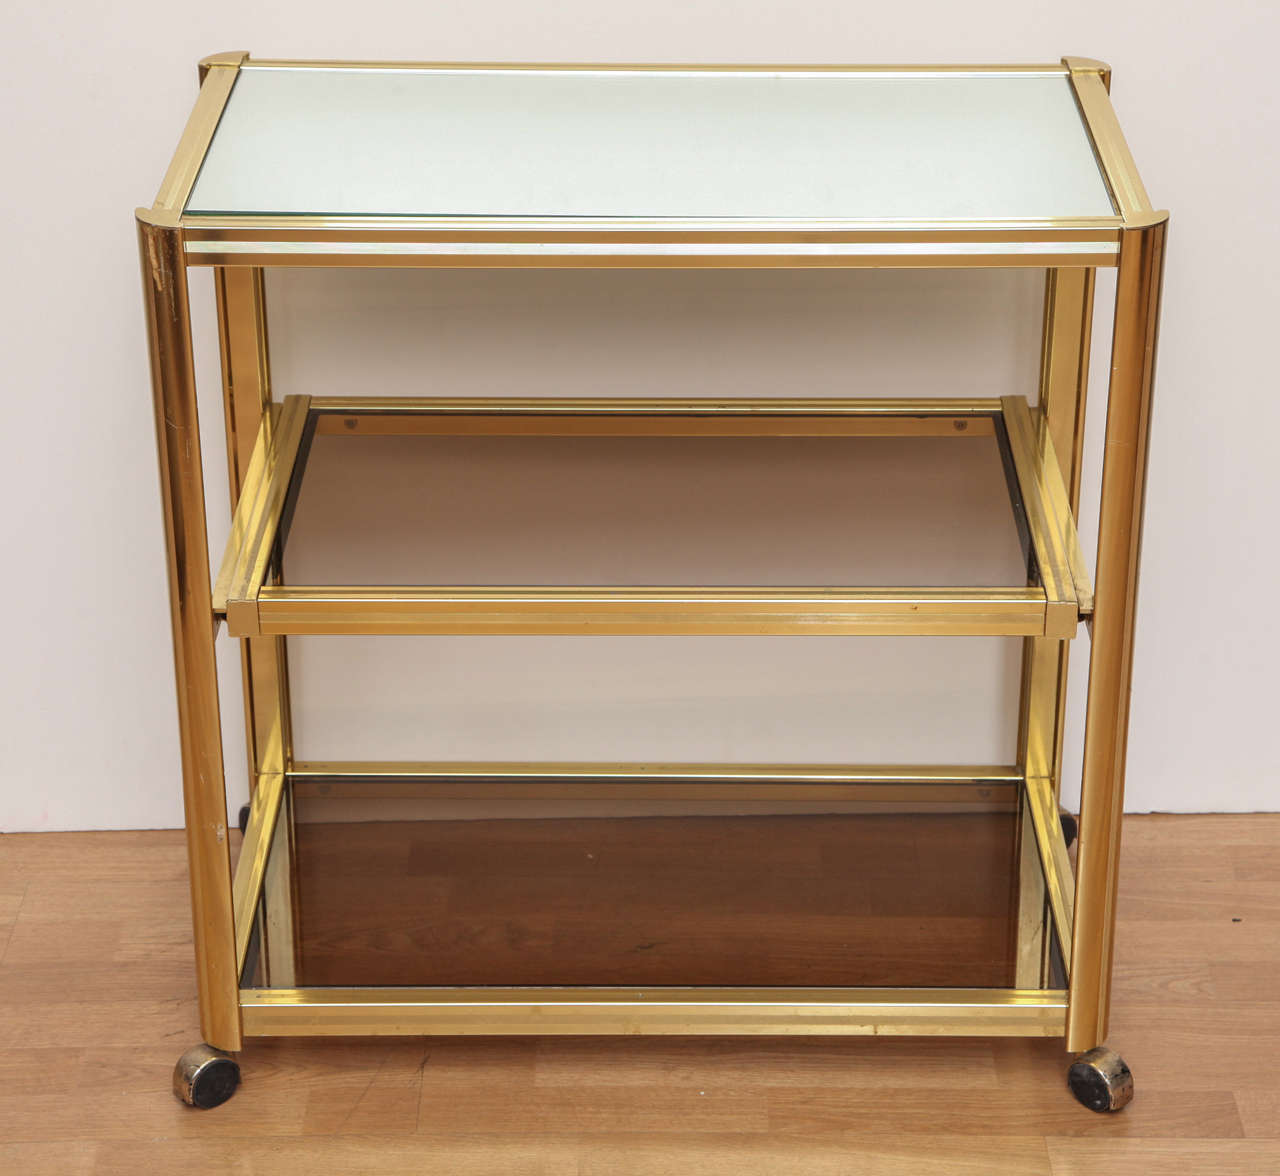 Modernist rolling bar cart in polished brass with mirror top and smoked glass shelves. Middle shelf pulls out; practical for serving.